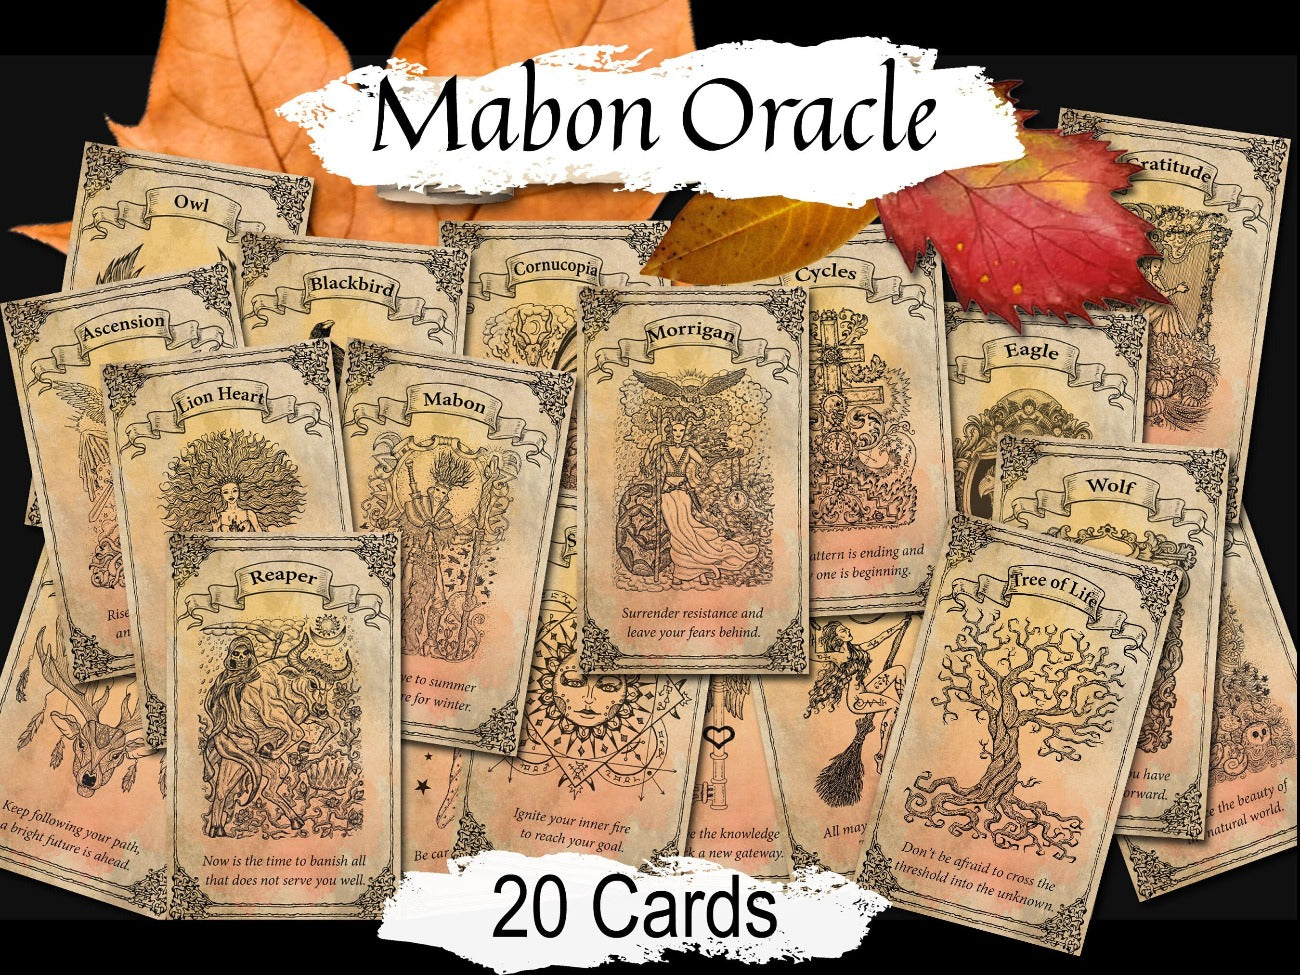 MABON ORACLE Divination Cards, Gain Spiritual Insight & Guidance, Access Hidden Truths with Inspiring Messages, Trust Magical Intuition - Morgana Magick Spell